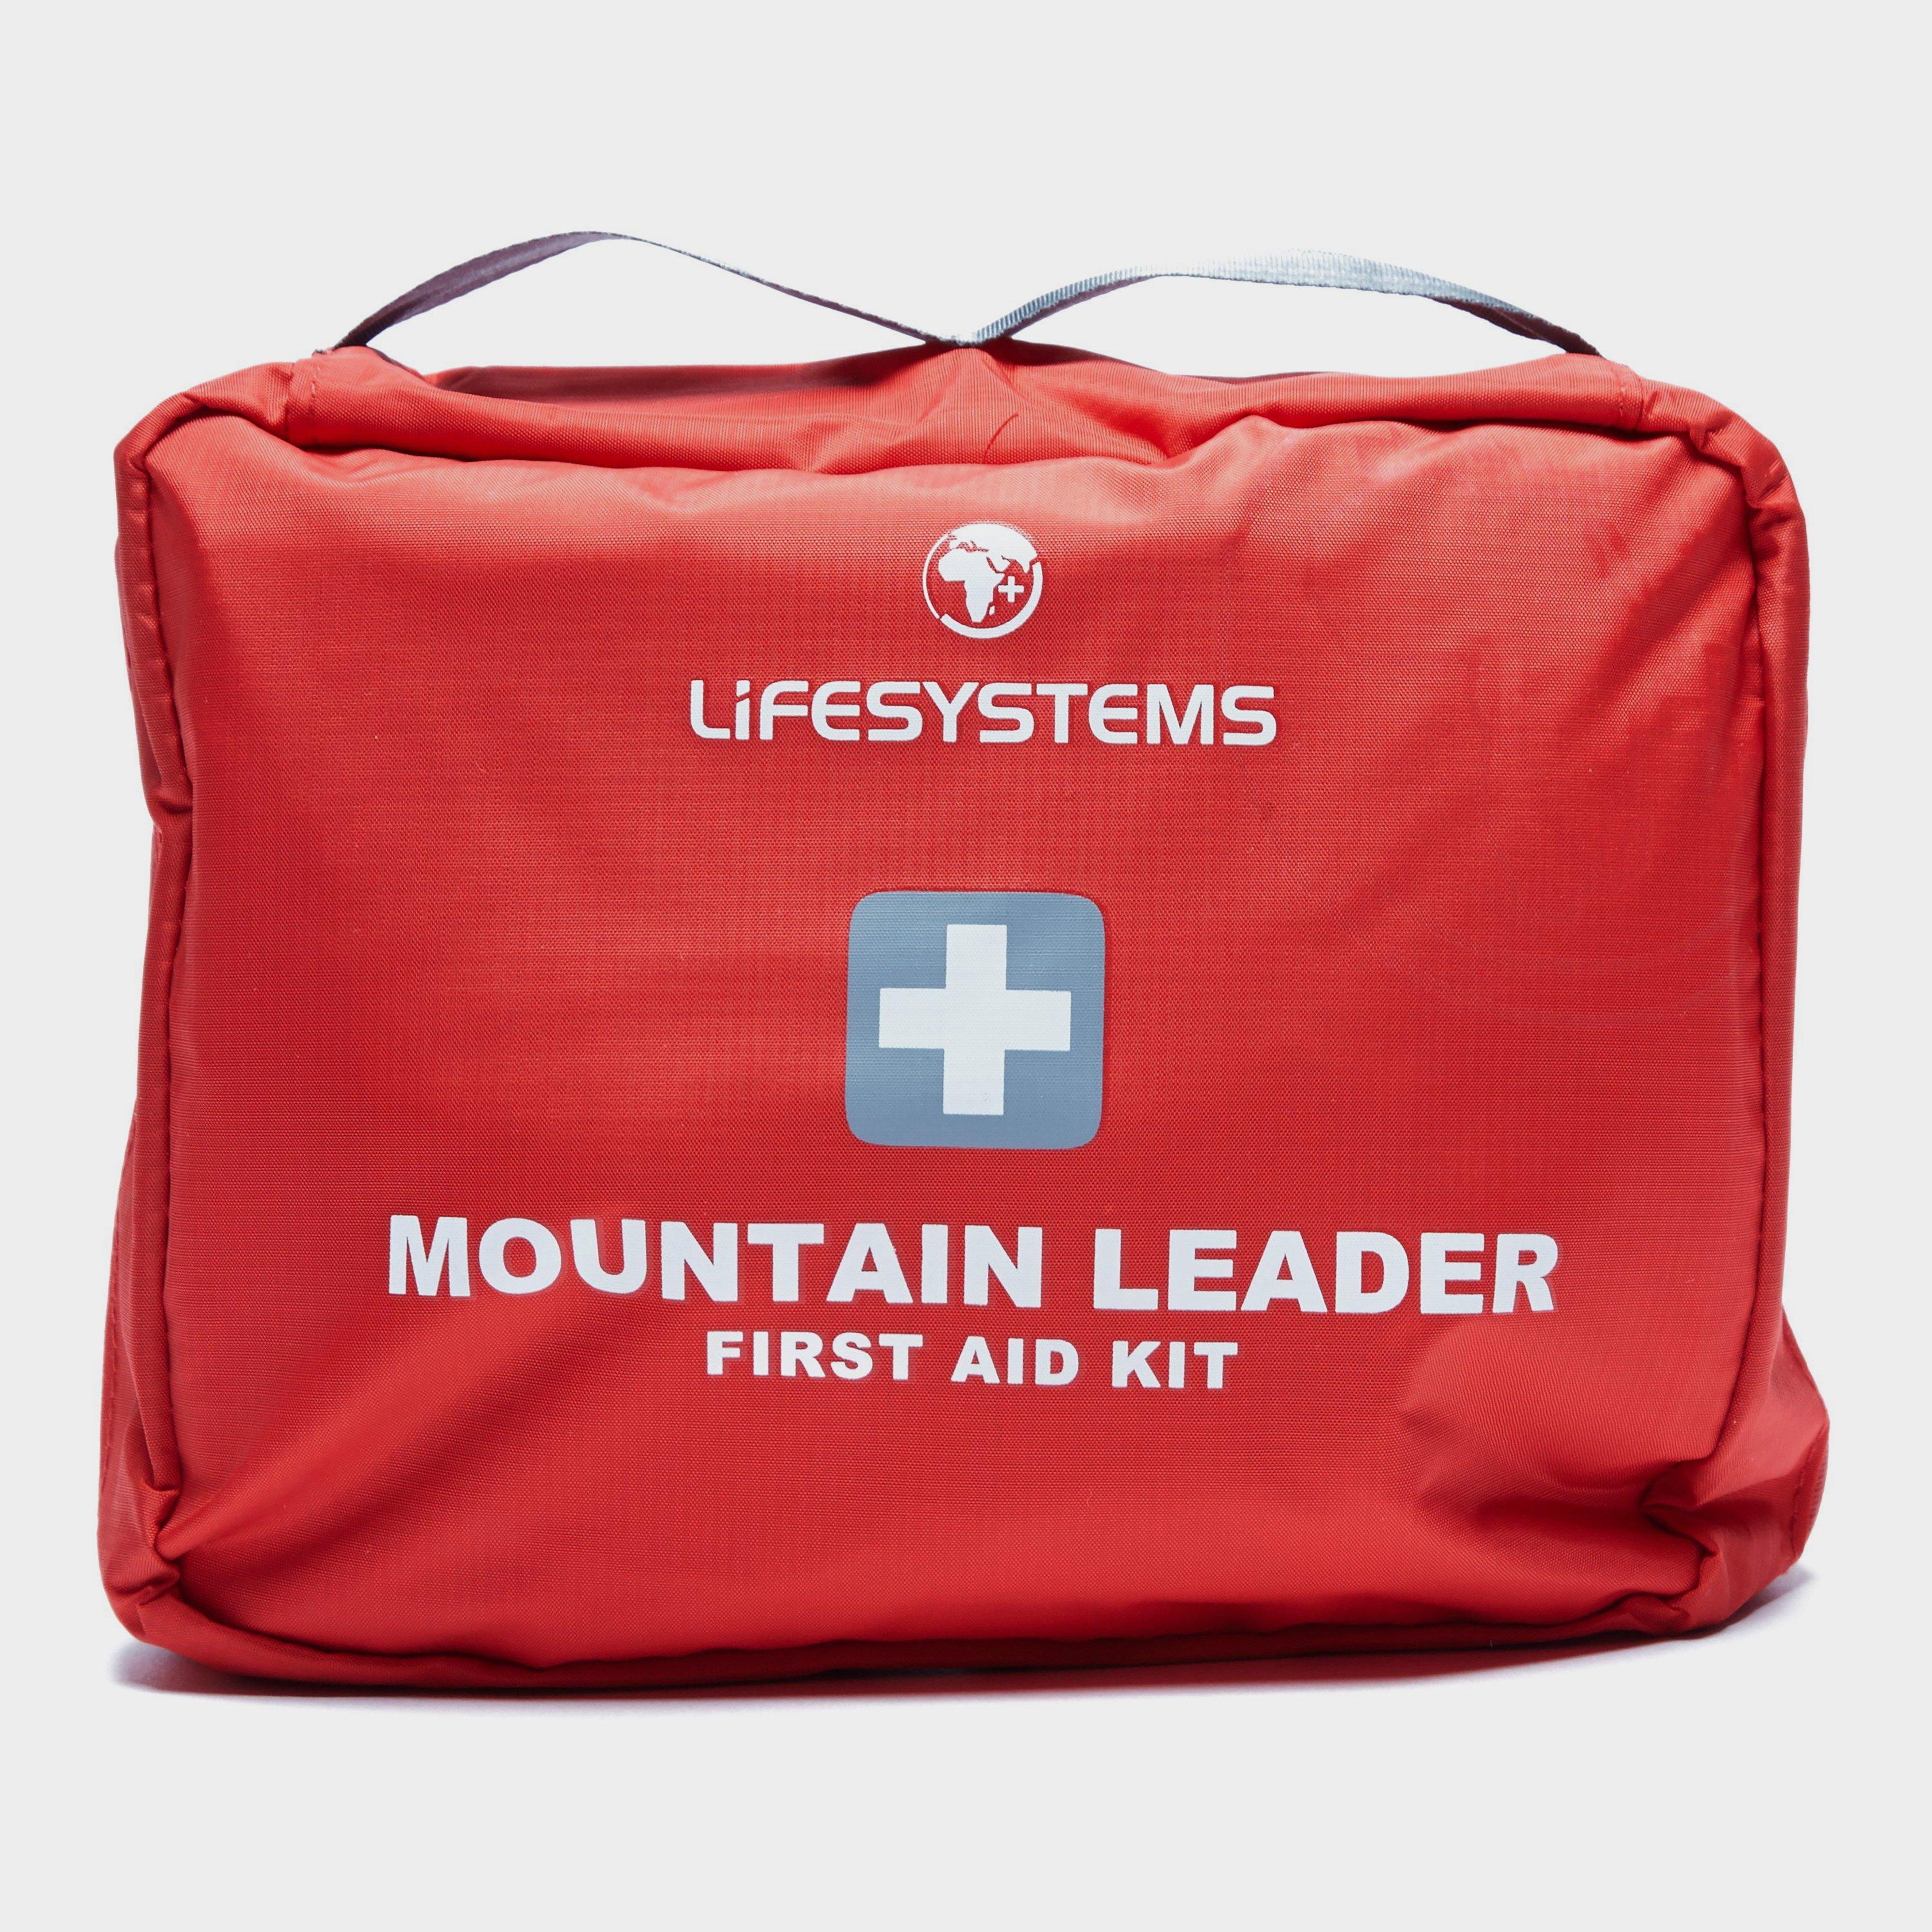 Lifesystems Mountain Leader First Aid Kit - Red  Red